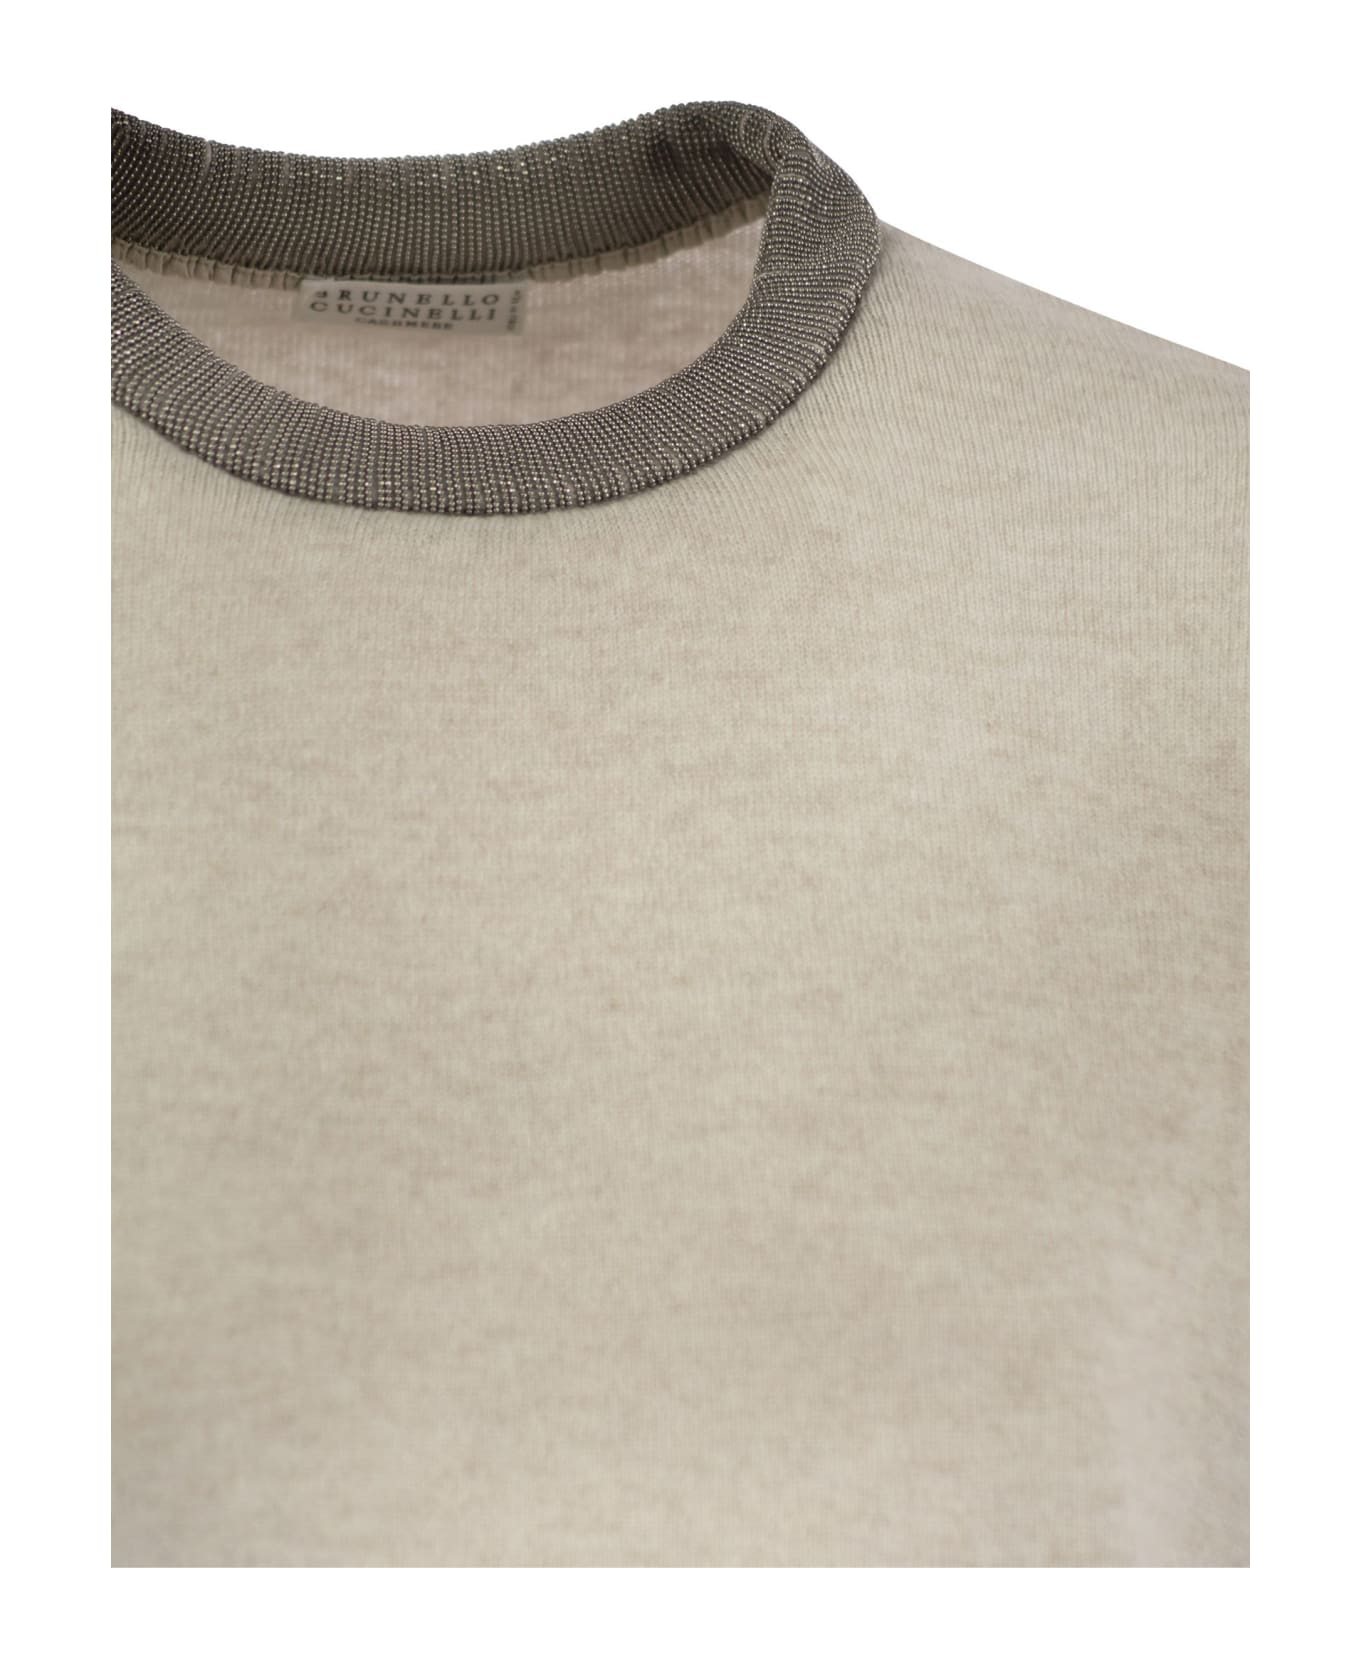 Brunello Cucinelli Cashmere Sweater With Necklace - Pearl フリース